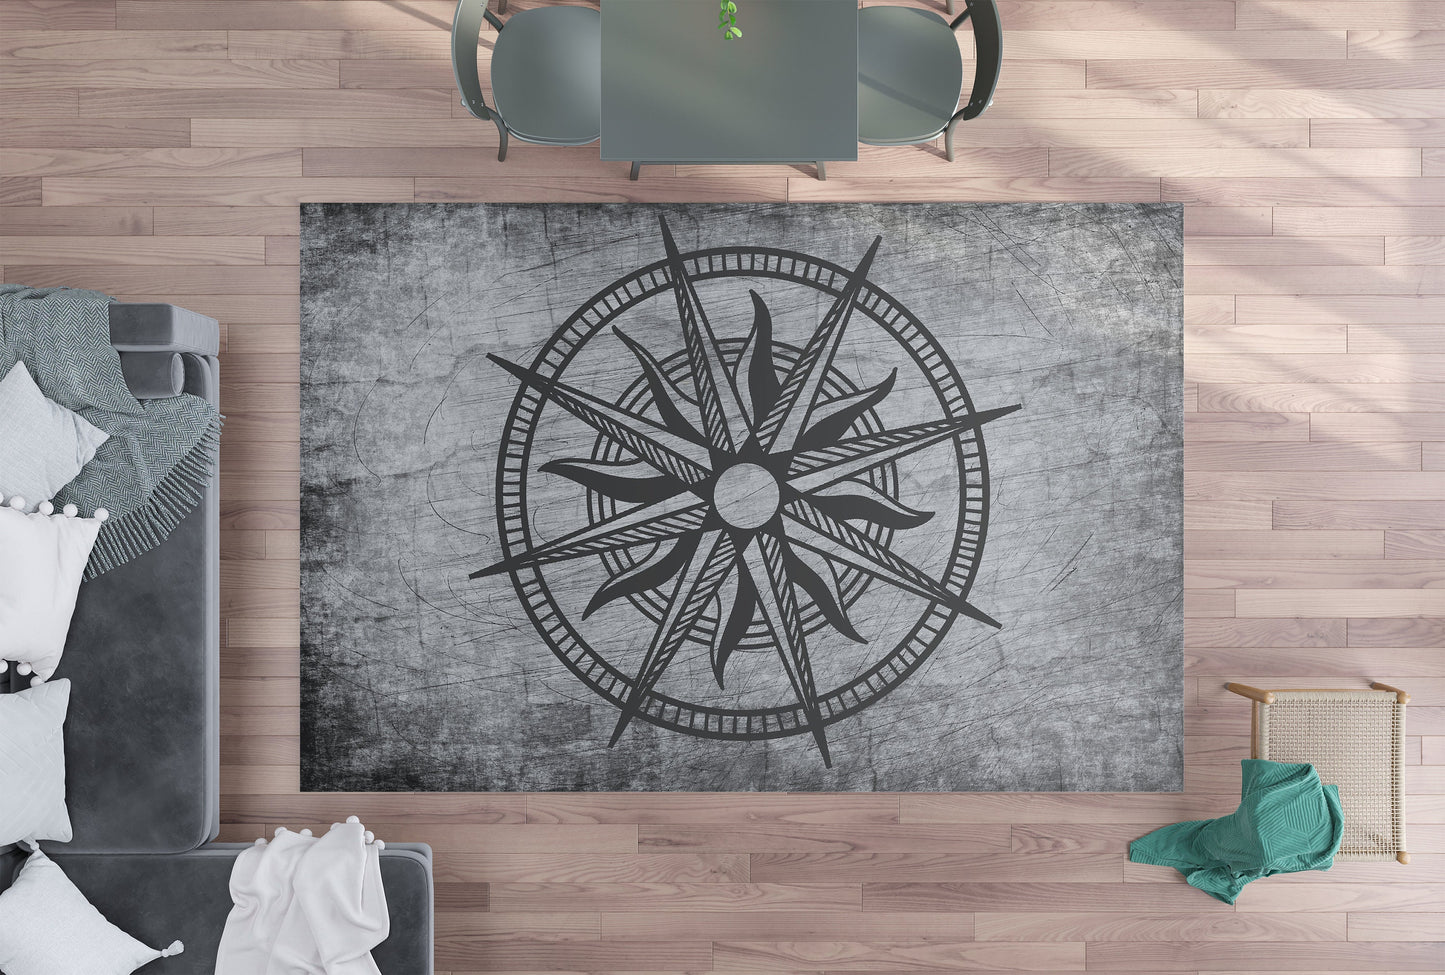 Compass Rug nautical gray grunge rug compasses floor mat large small marine ocean boat boating